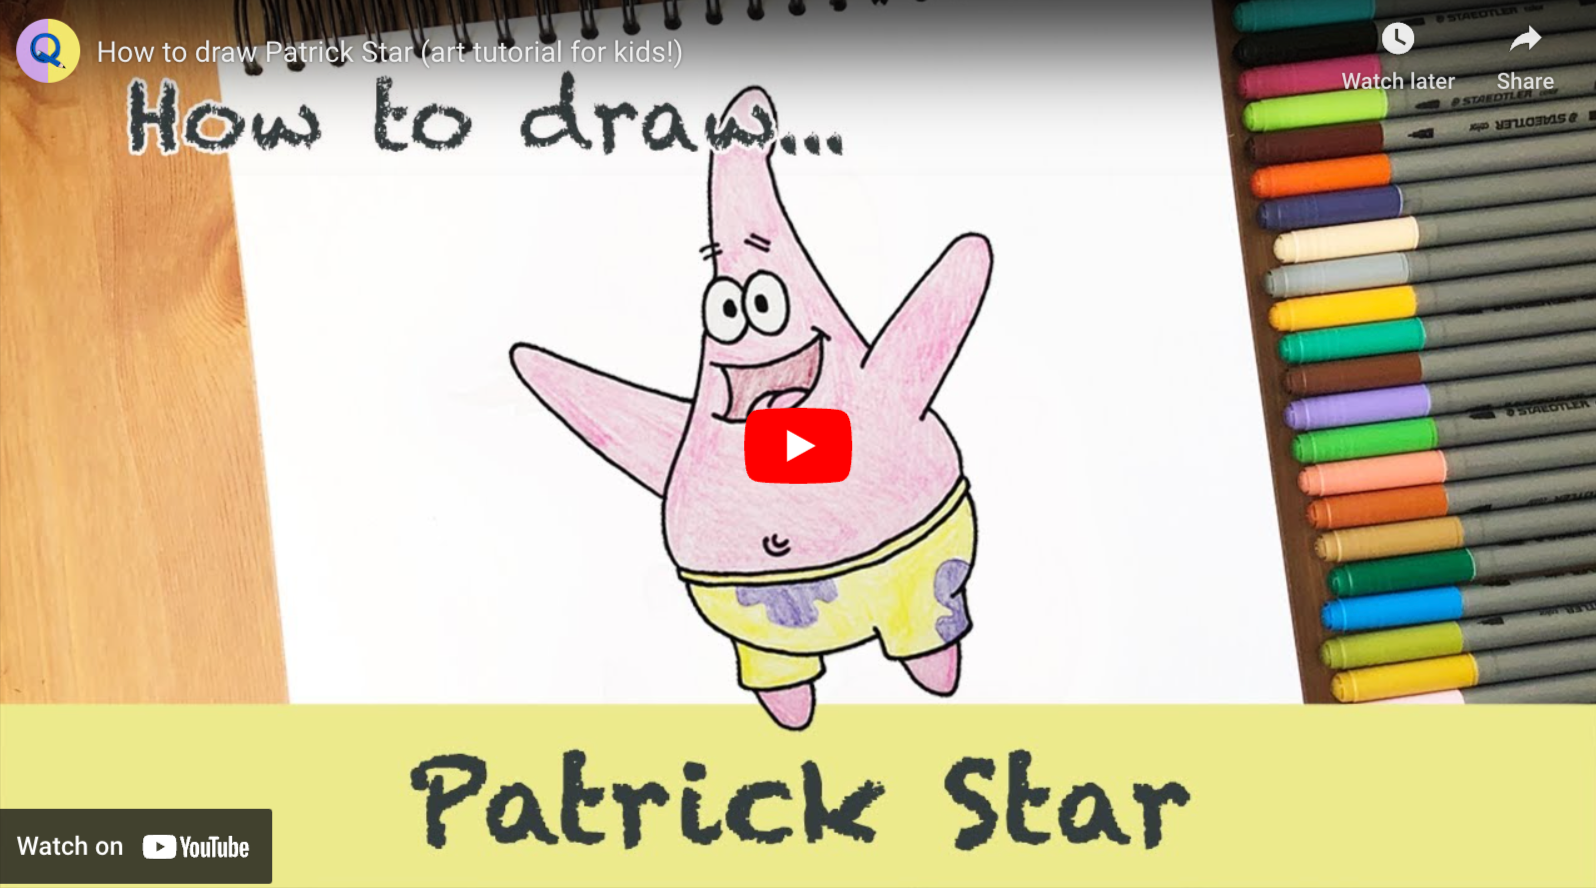 Load video: How to draw Patrick Star video